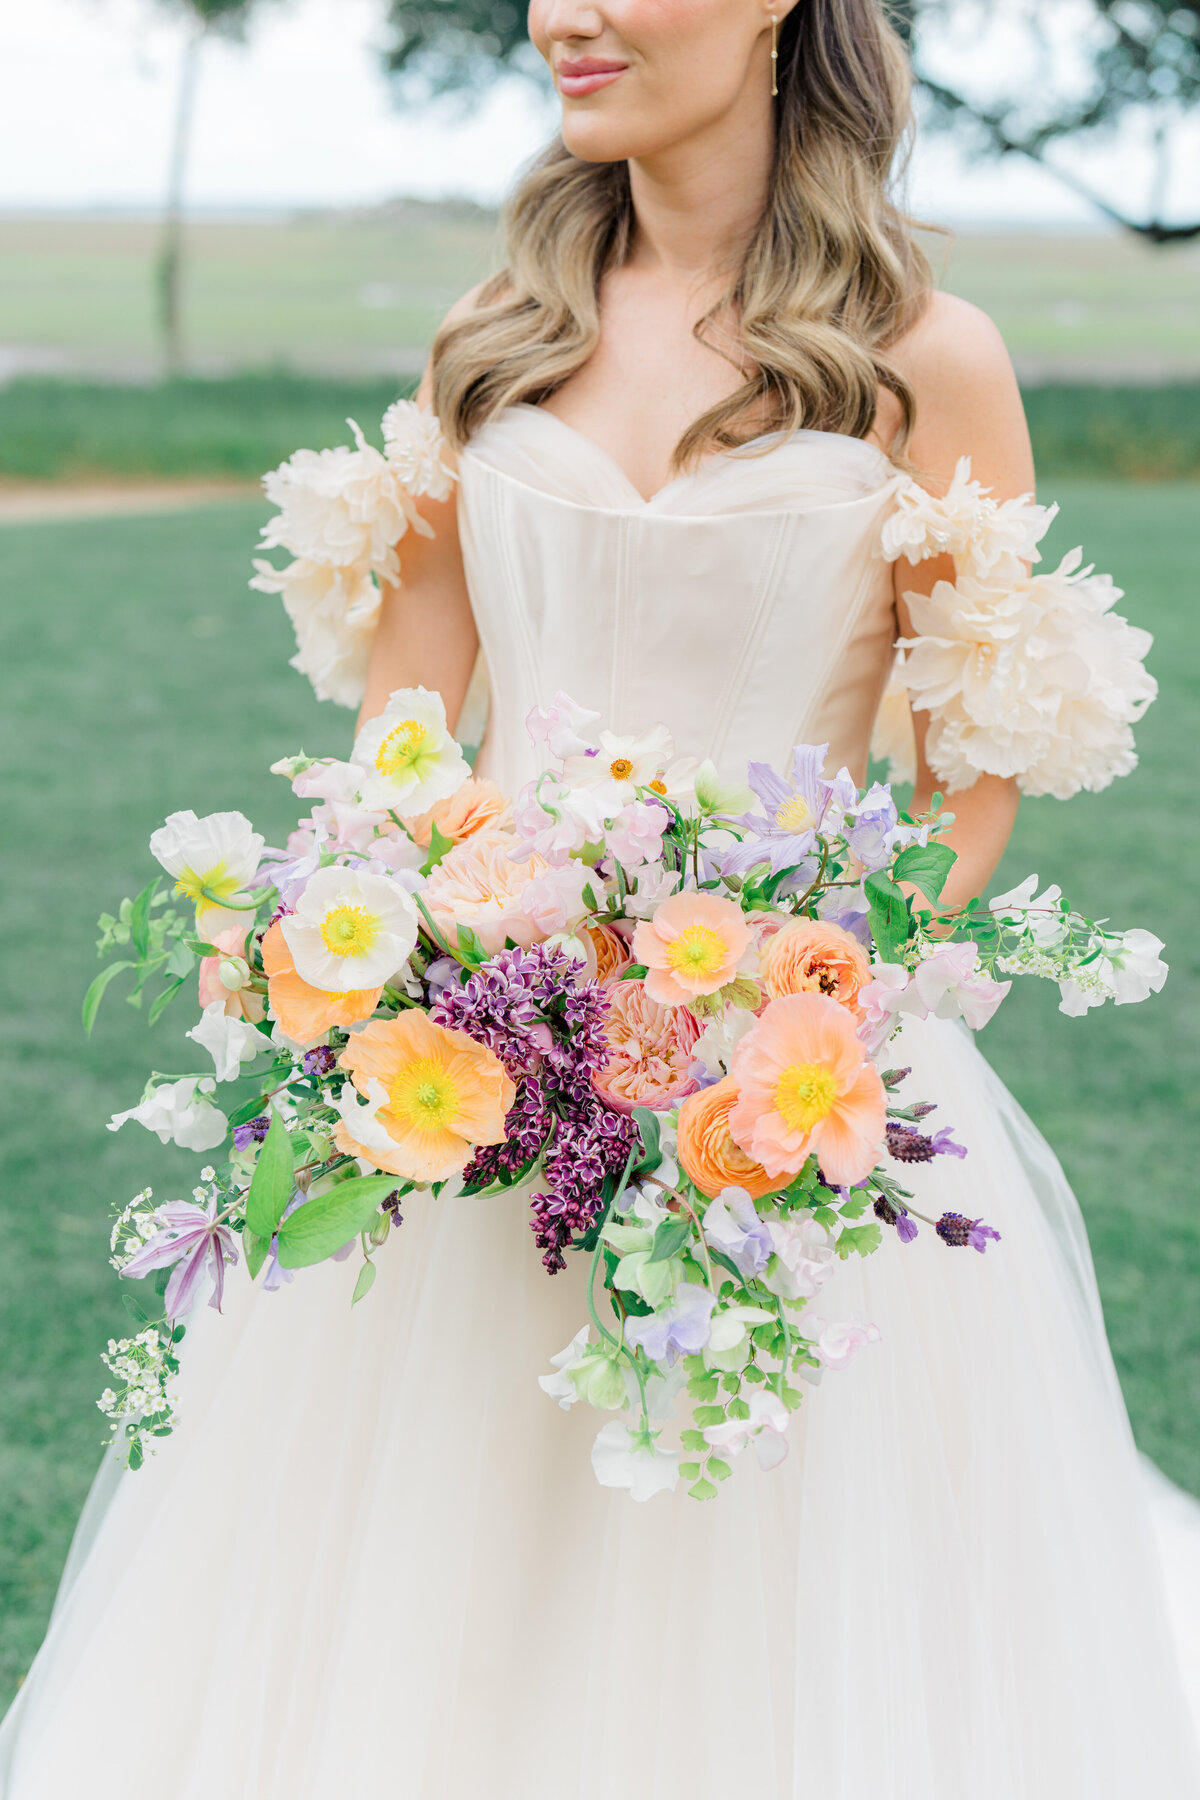 Peach, pink, and purple  wedding flowers. Blush Wedding dress with floral sleeves